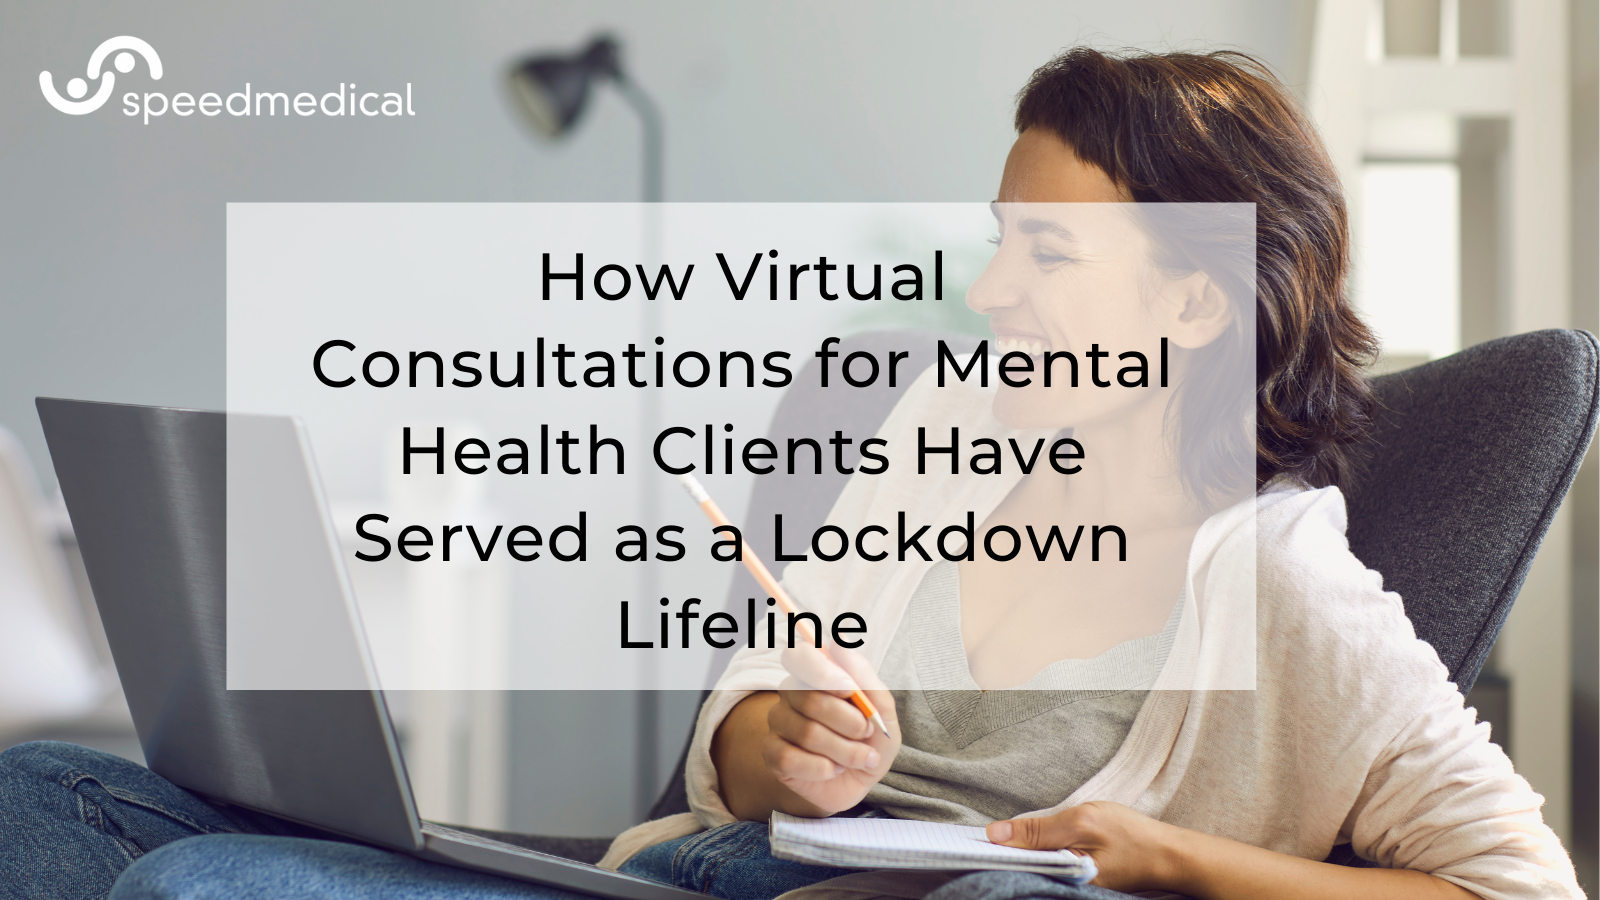 How Virtual Consultations for Mental Health Clients Have Served as a Lockdown Lifeline